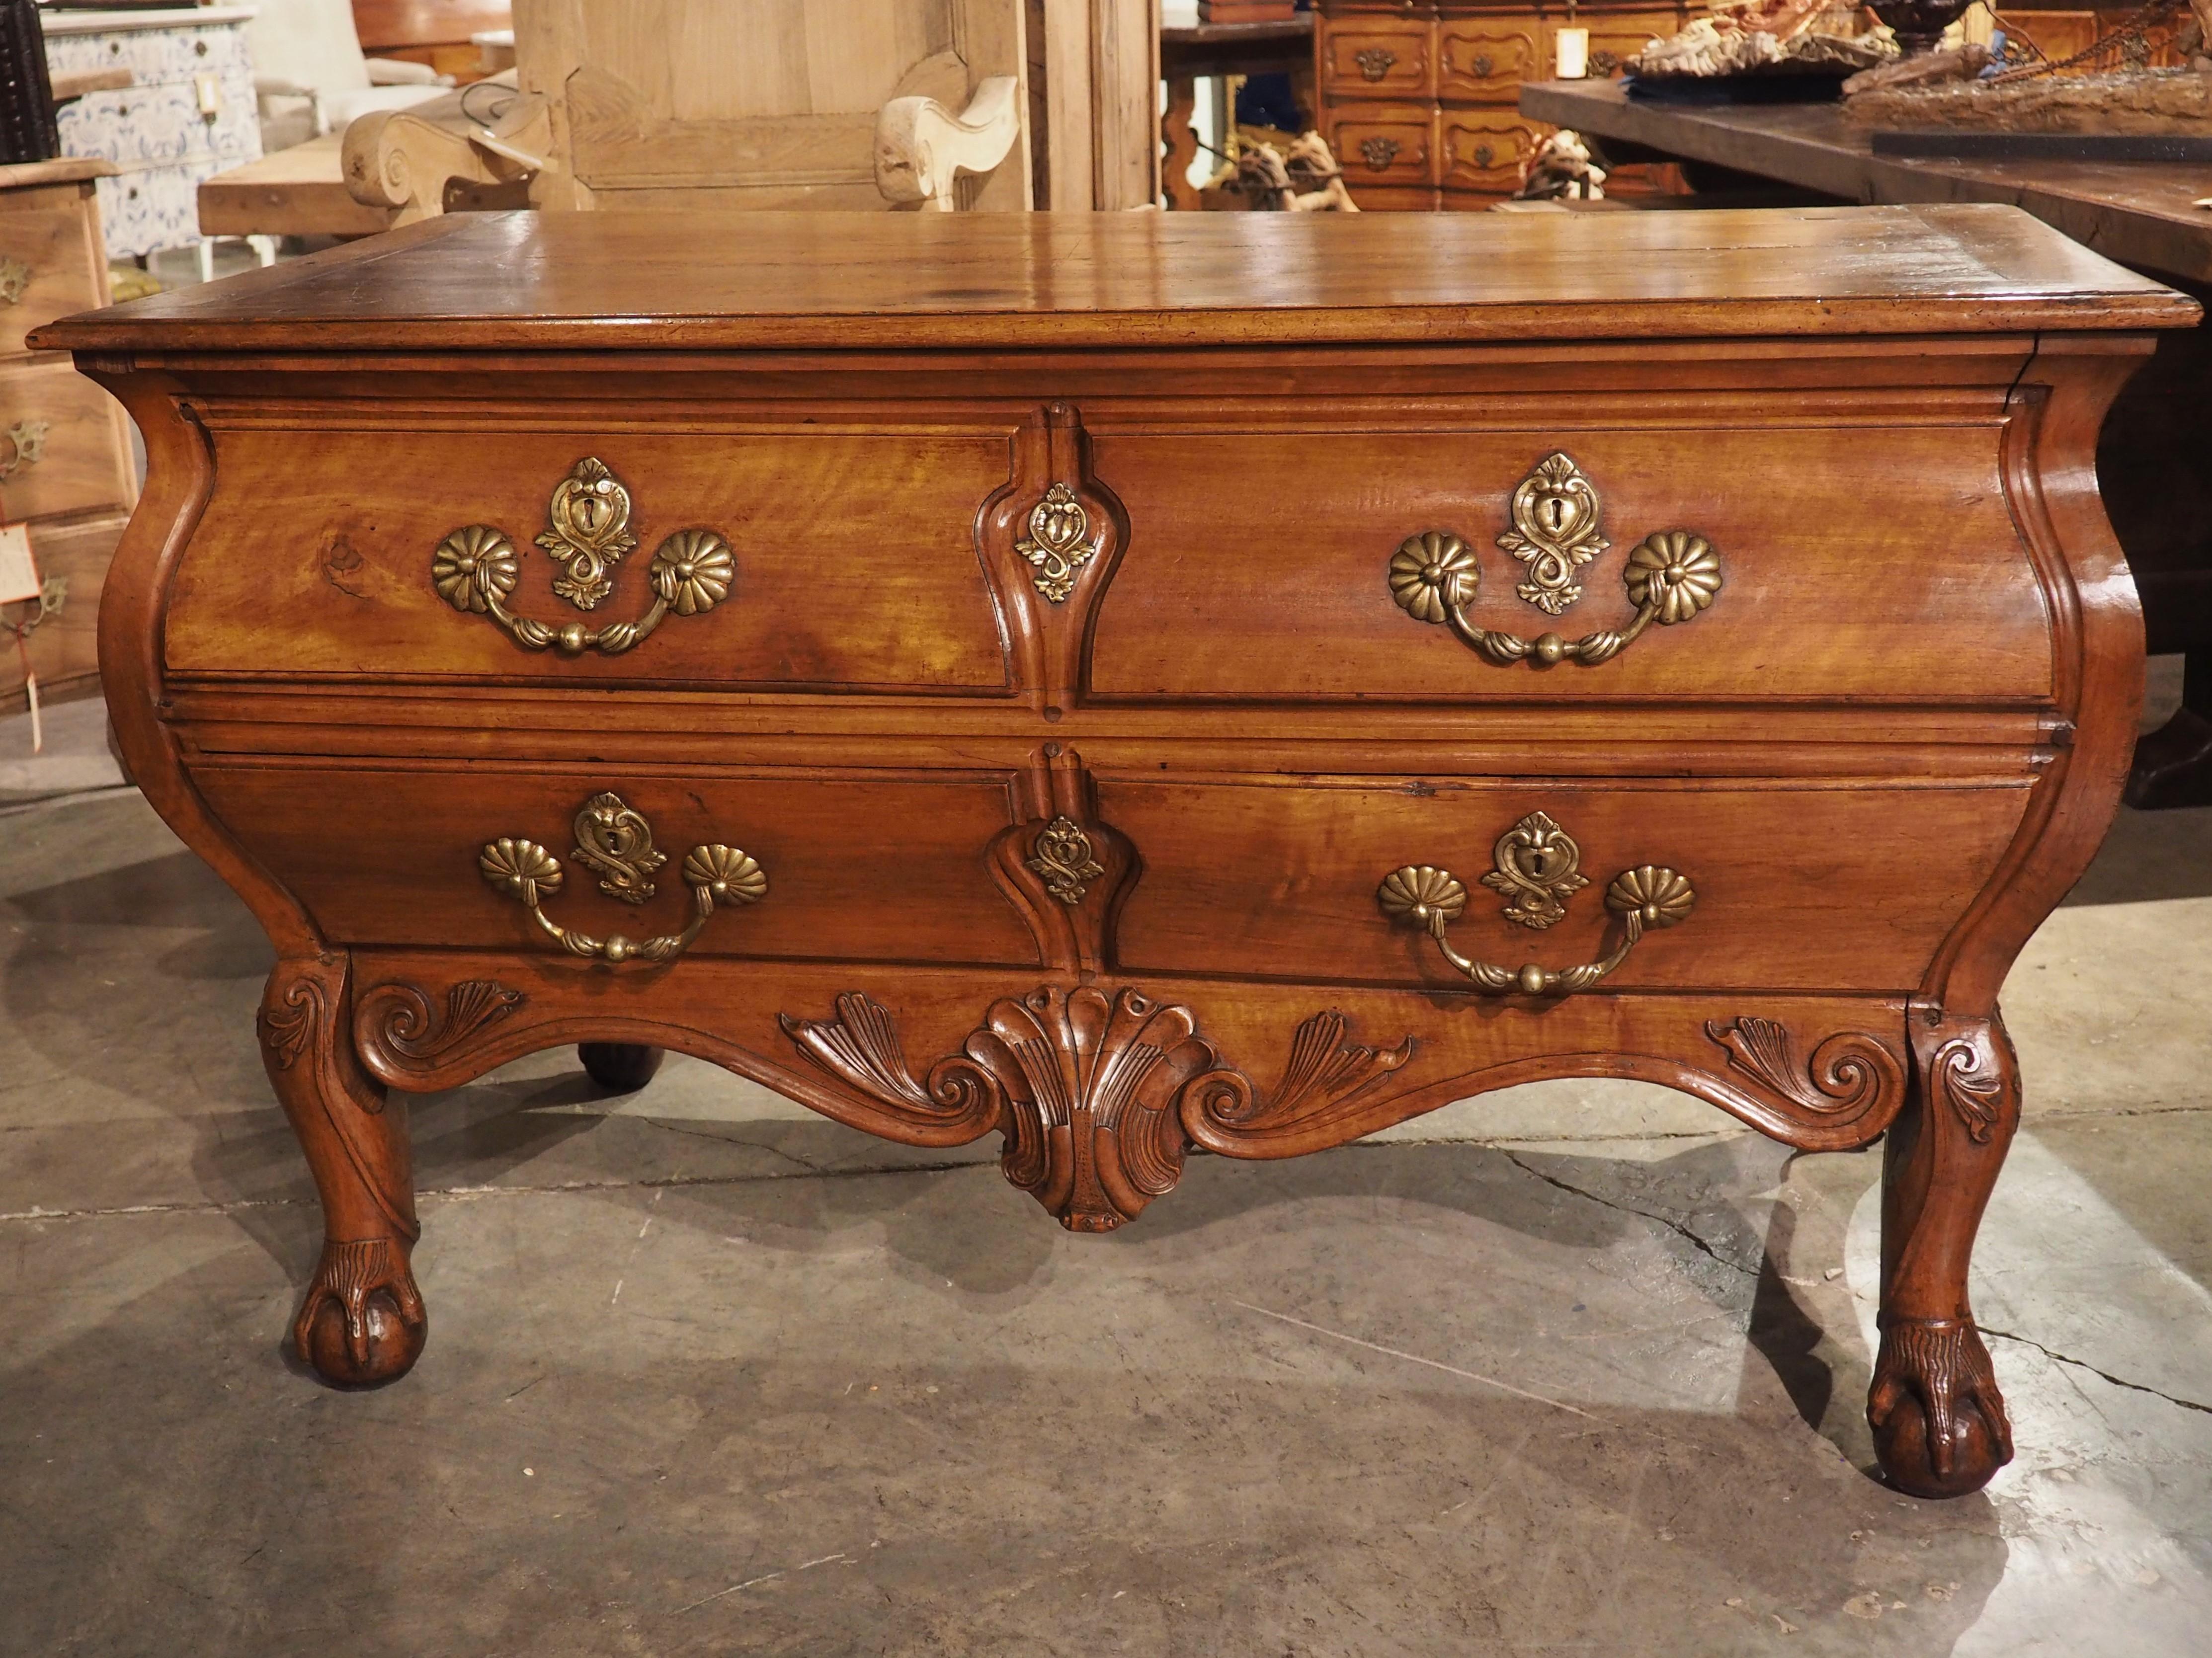 Rare 18th Century French Walnut Commode “Angouleme” with Stamped Bronze Hardware For Sale 12